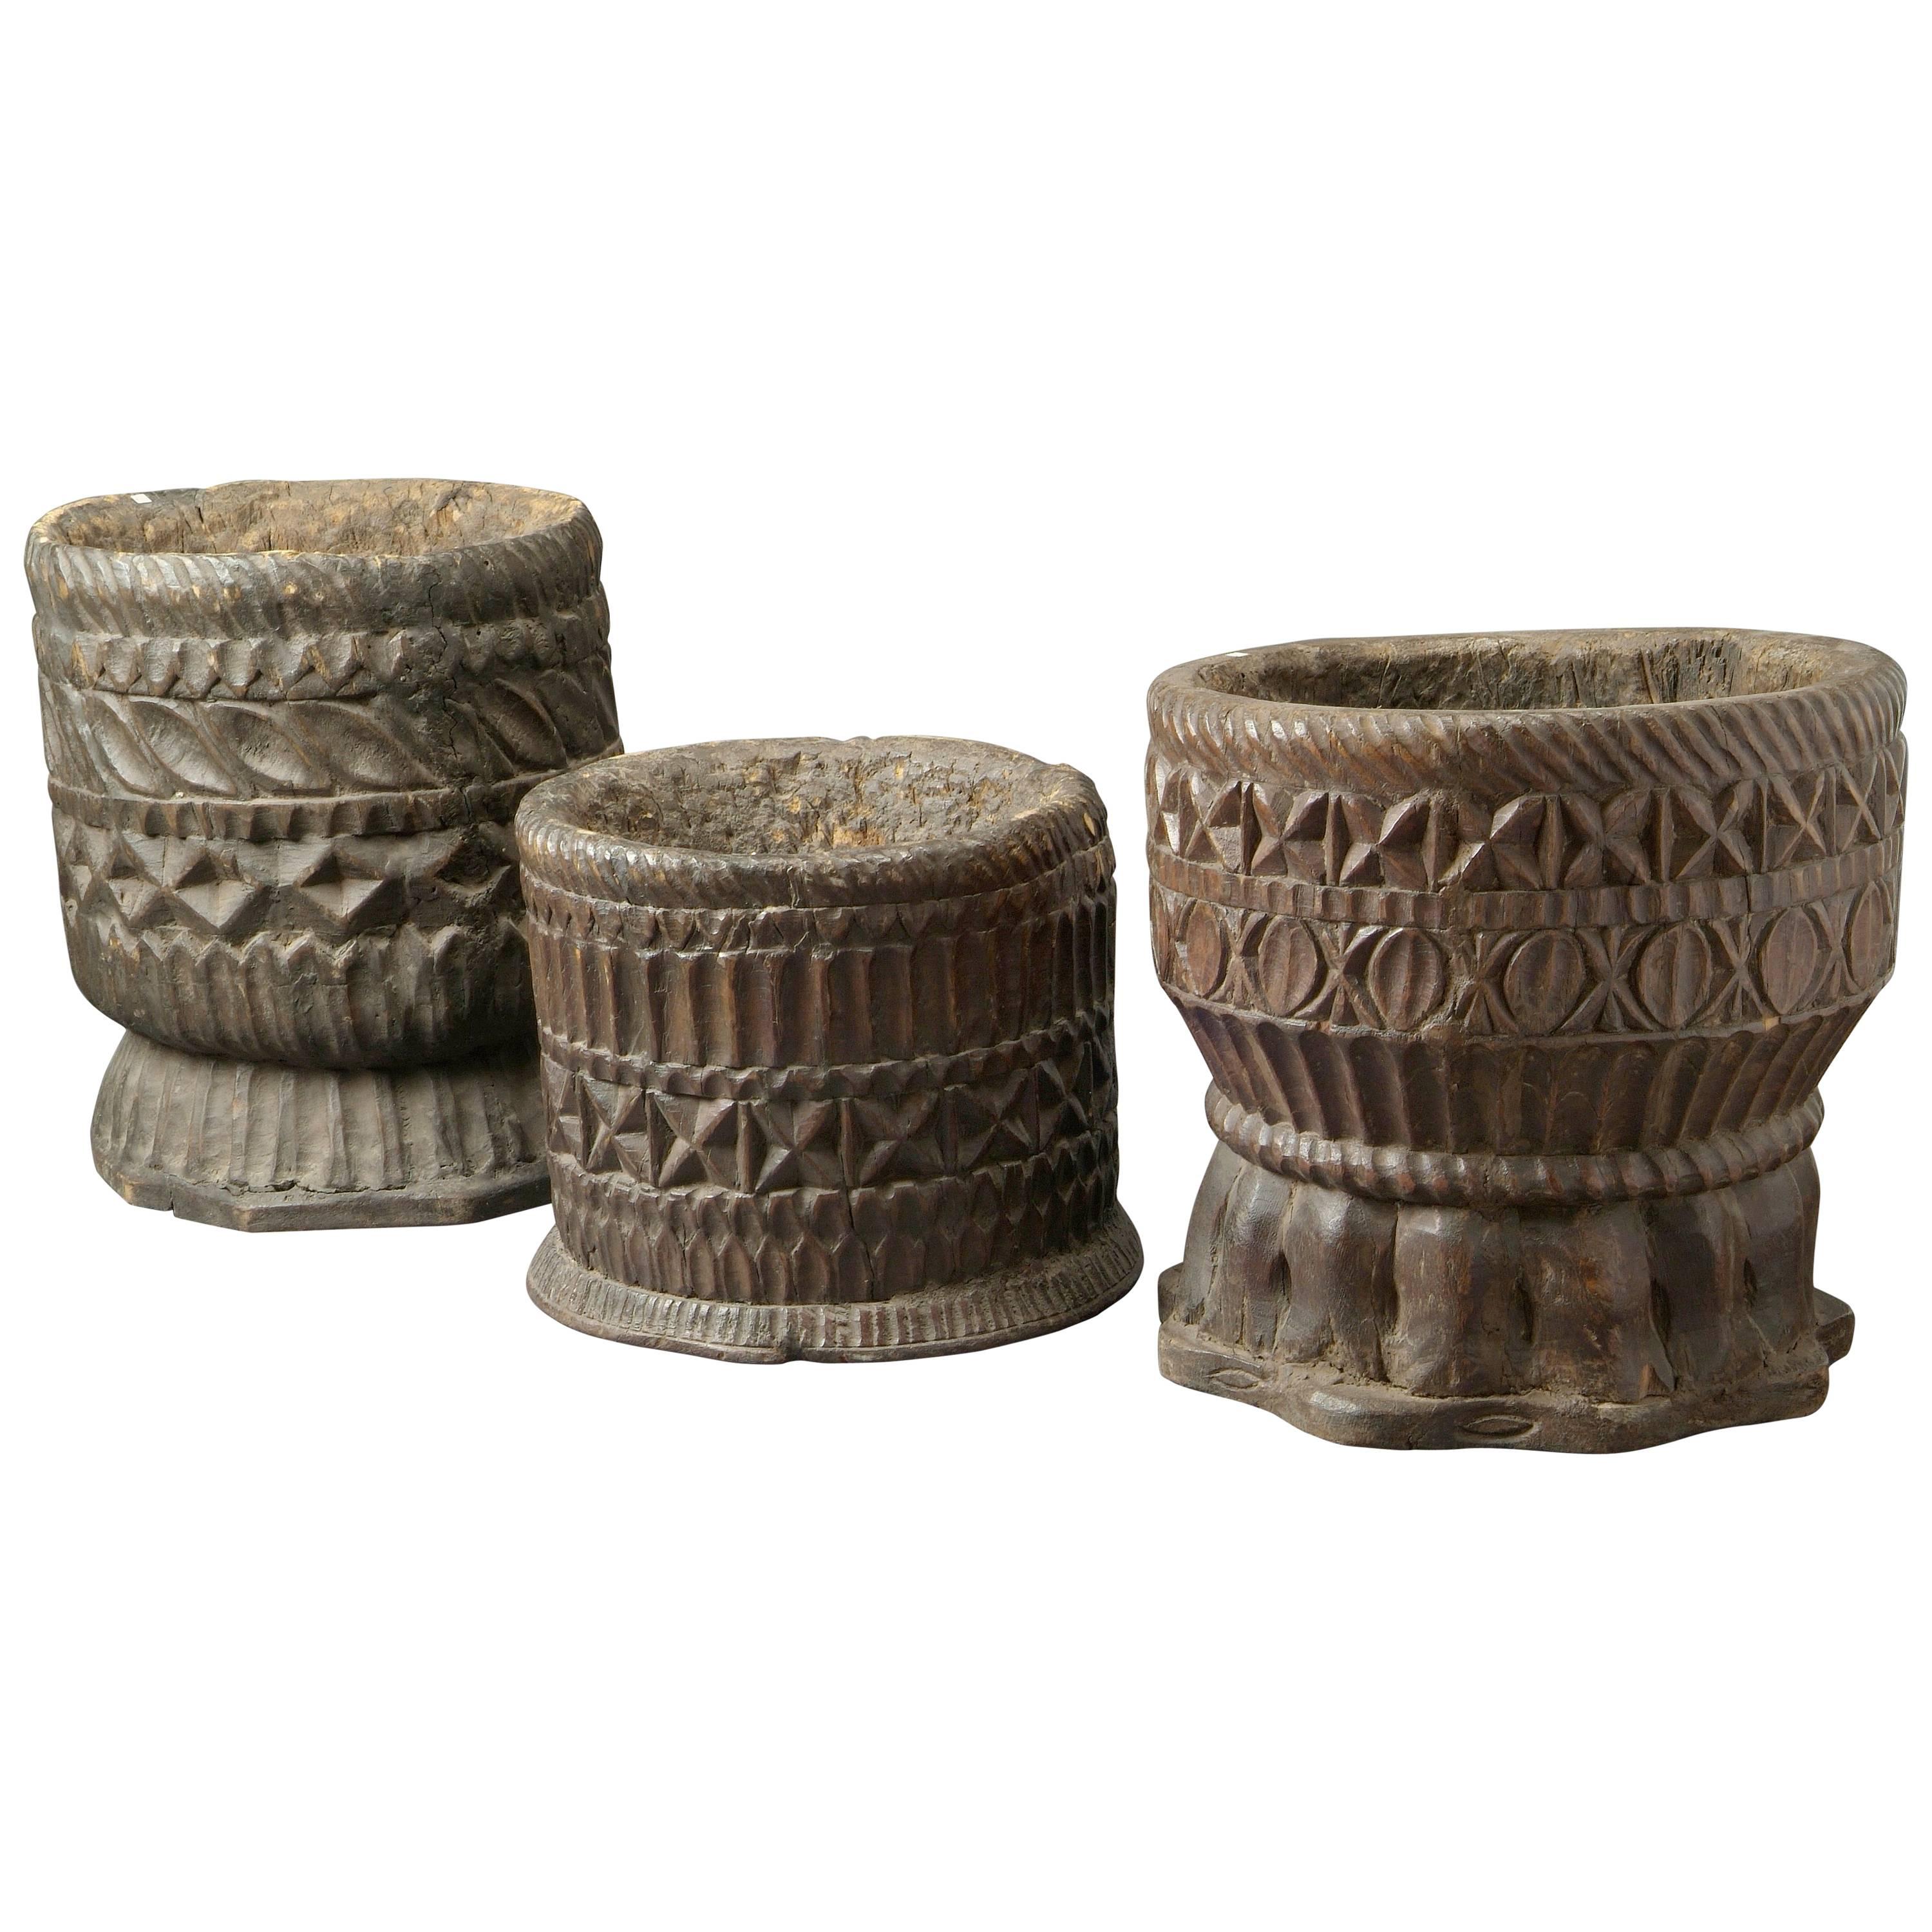 Set of Wooden Mortars Carved in the Form of Elephant Feet, India, 18th Century For Sale